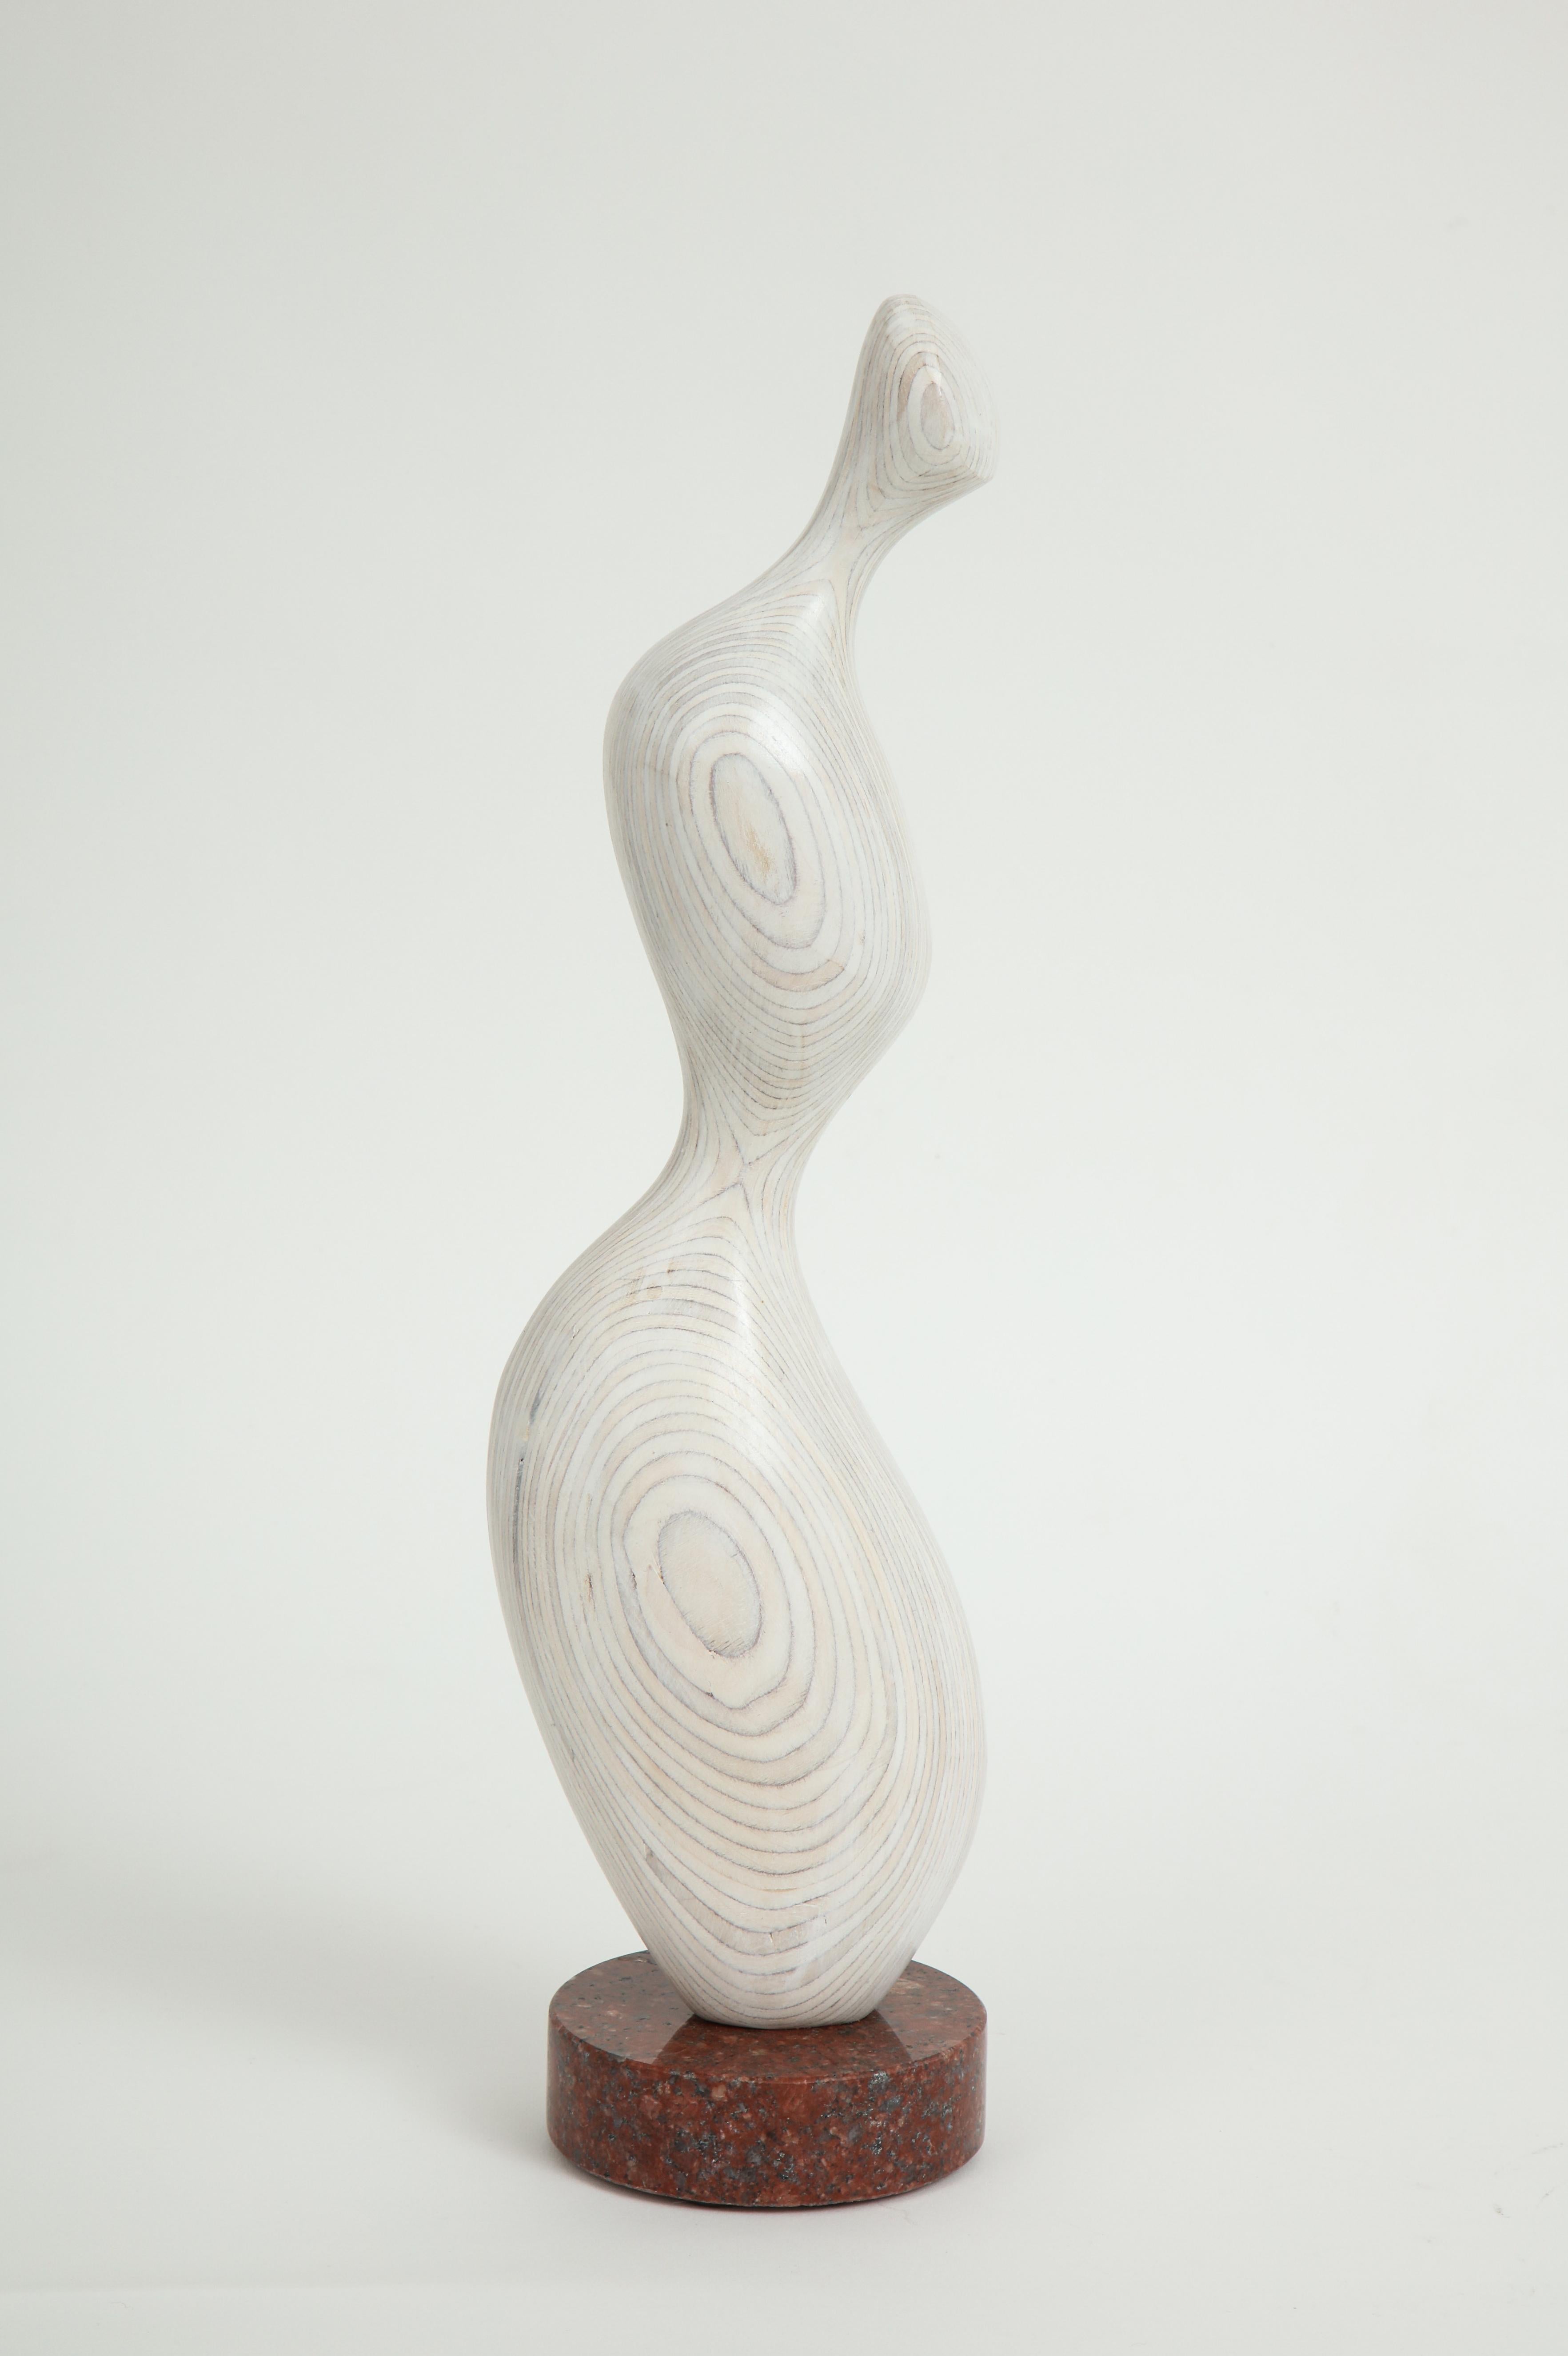 'Figure Study I' by Dick Shanley
Medium: Laminated birch wood mounted on a round granite base
Signed: DS
Size: 17